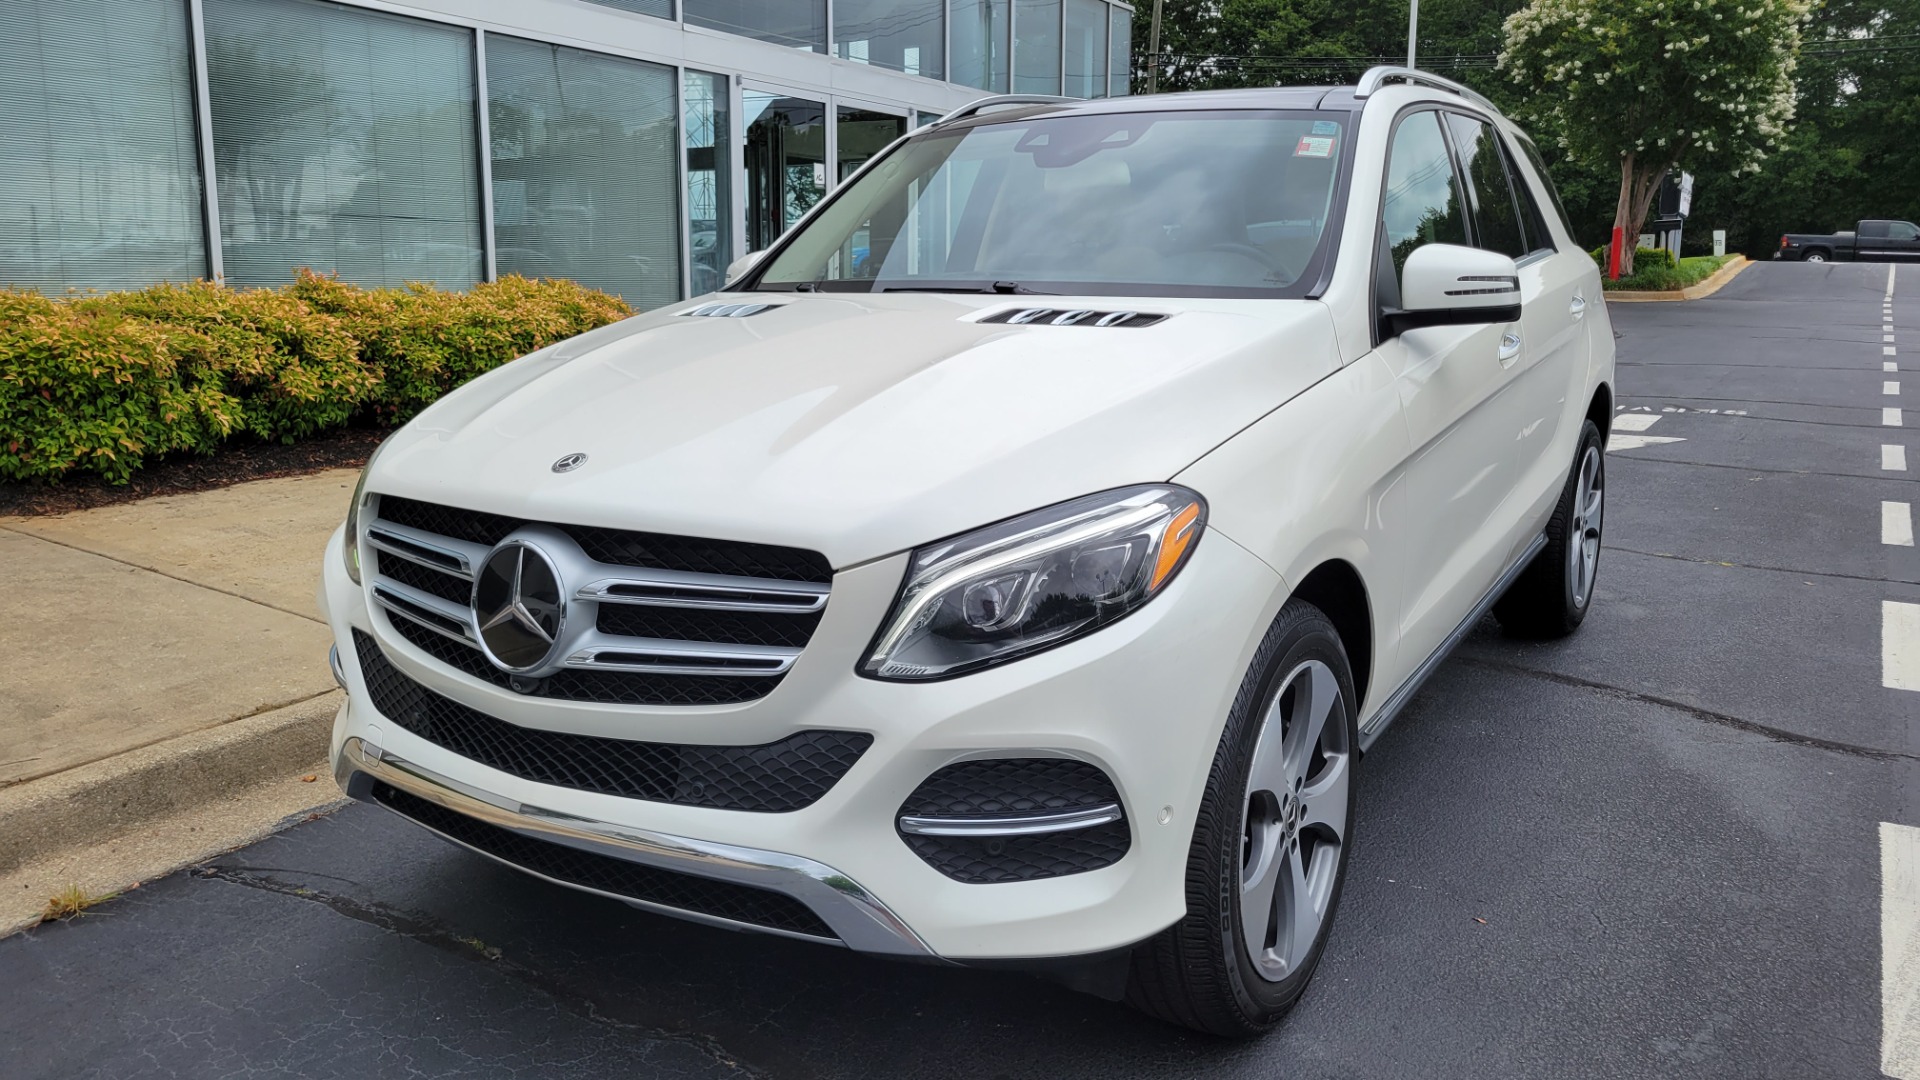 Used 2018 Mercedes-Benz GLE 350 4MATIC SUV / PREMIUM 3 / PANO-ROOF / H/K SND / REARVIEW for sale $39,495 at Formula Imports in Charlotte NC 28227 2